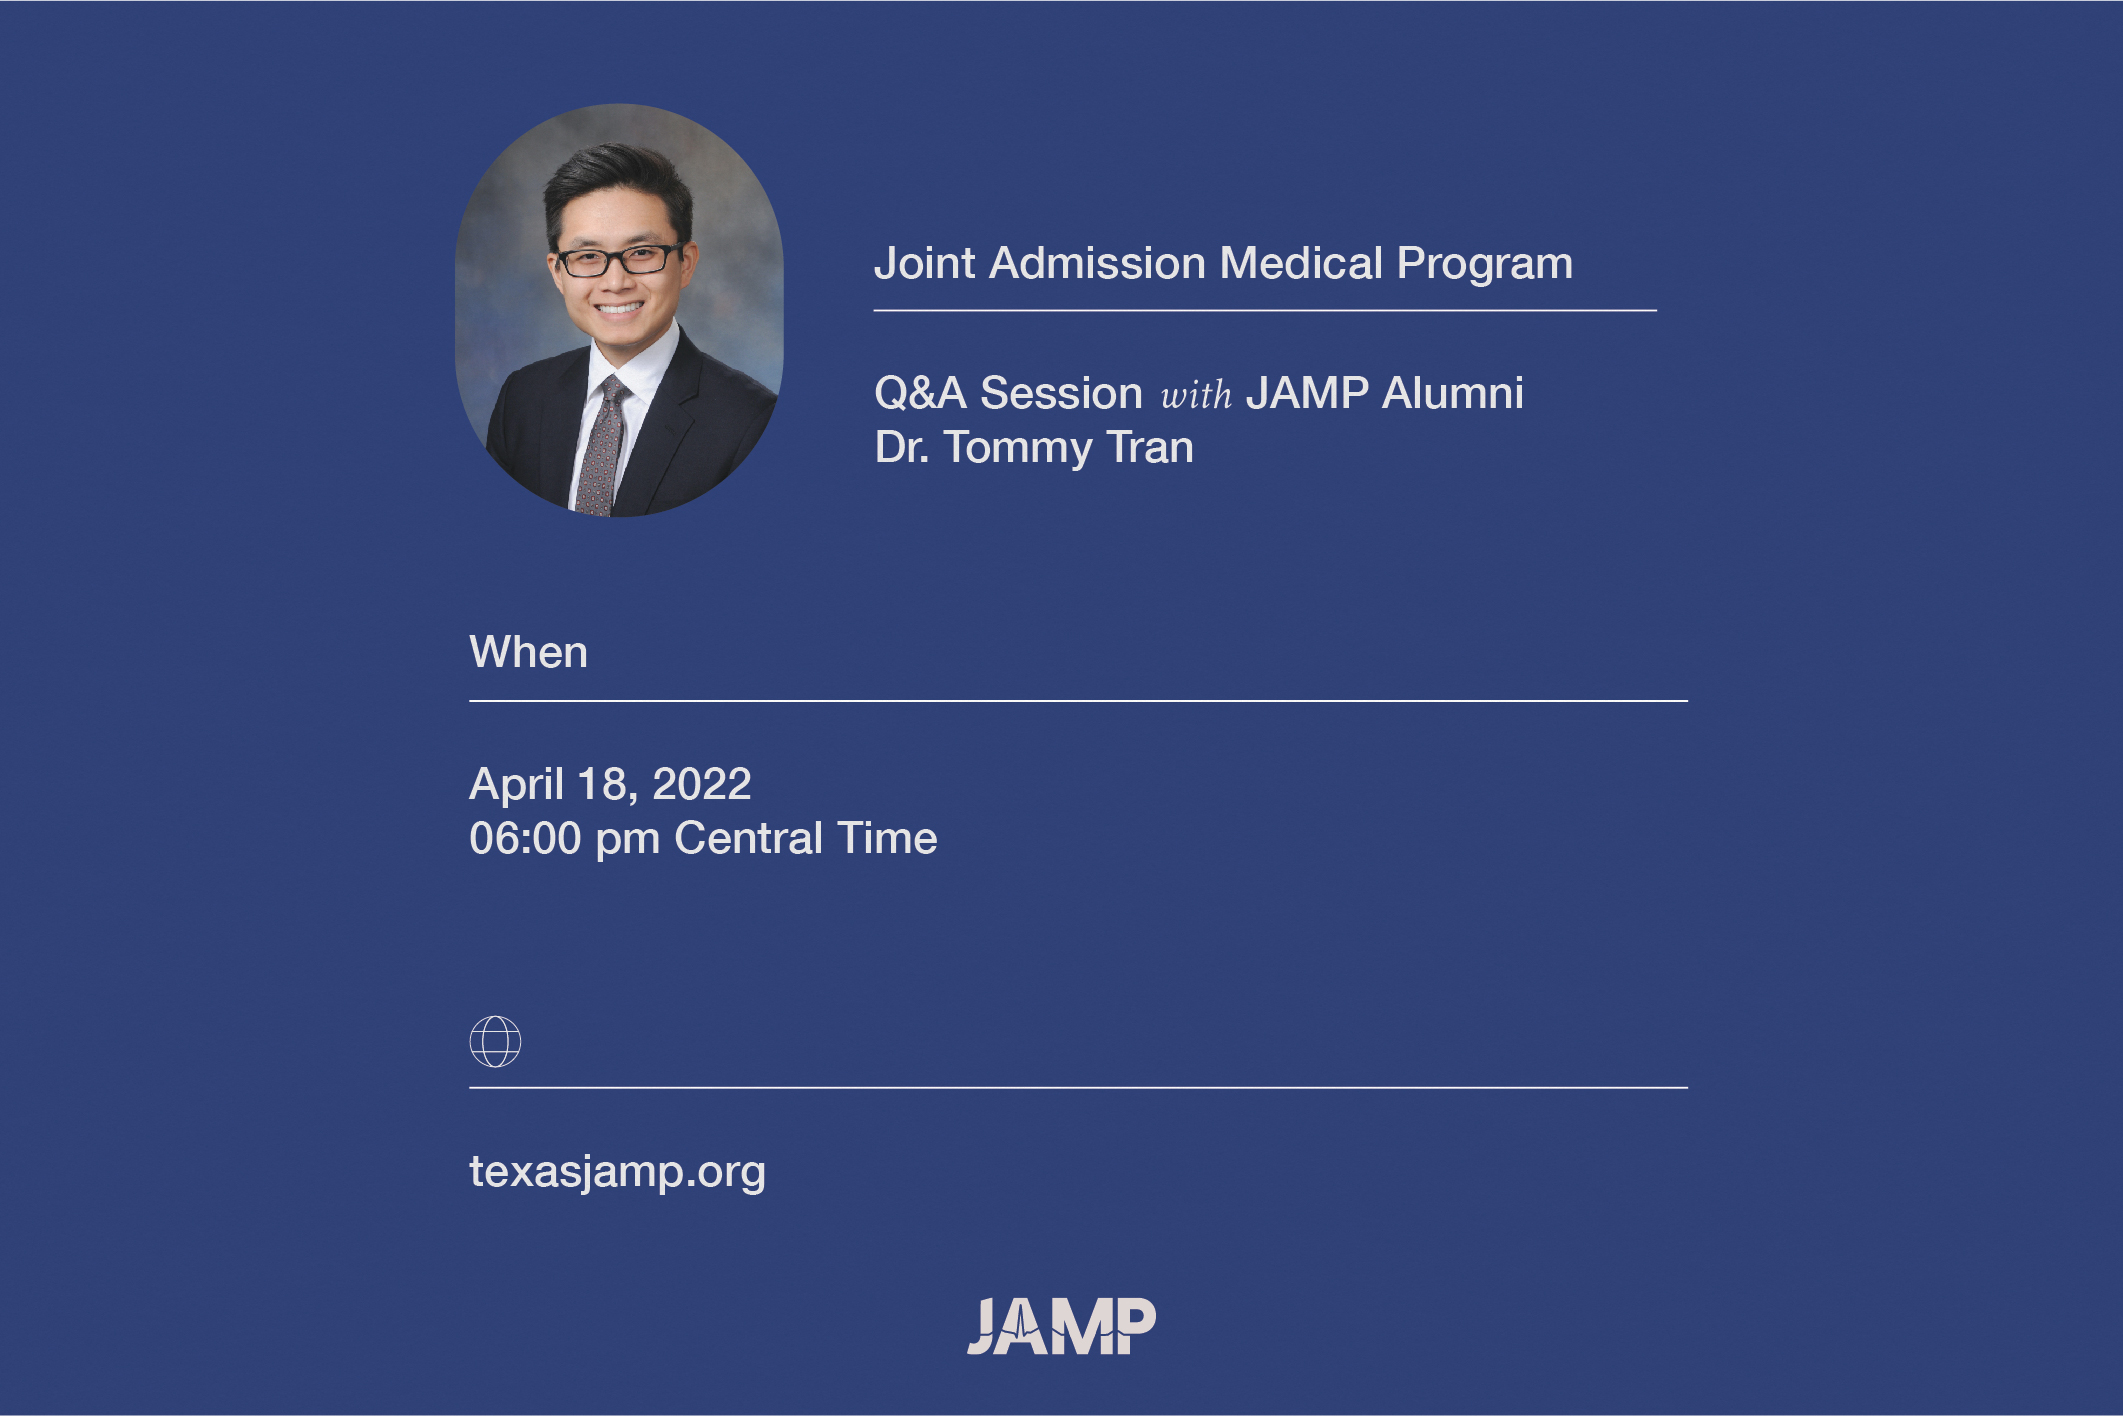 https://www.txhes.com/_resources/images/newsroom-resources/stock-photos/jamp-qasession-tommy-tran-02.jpg